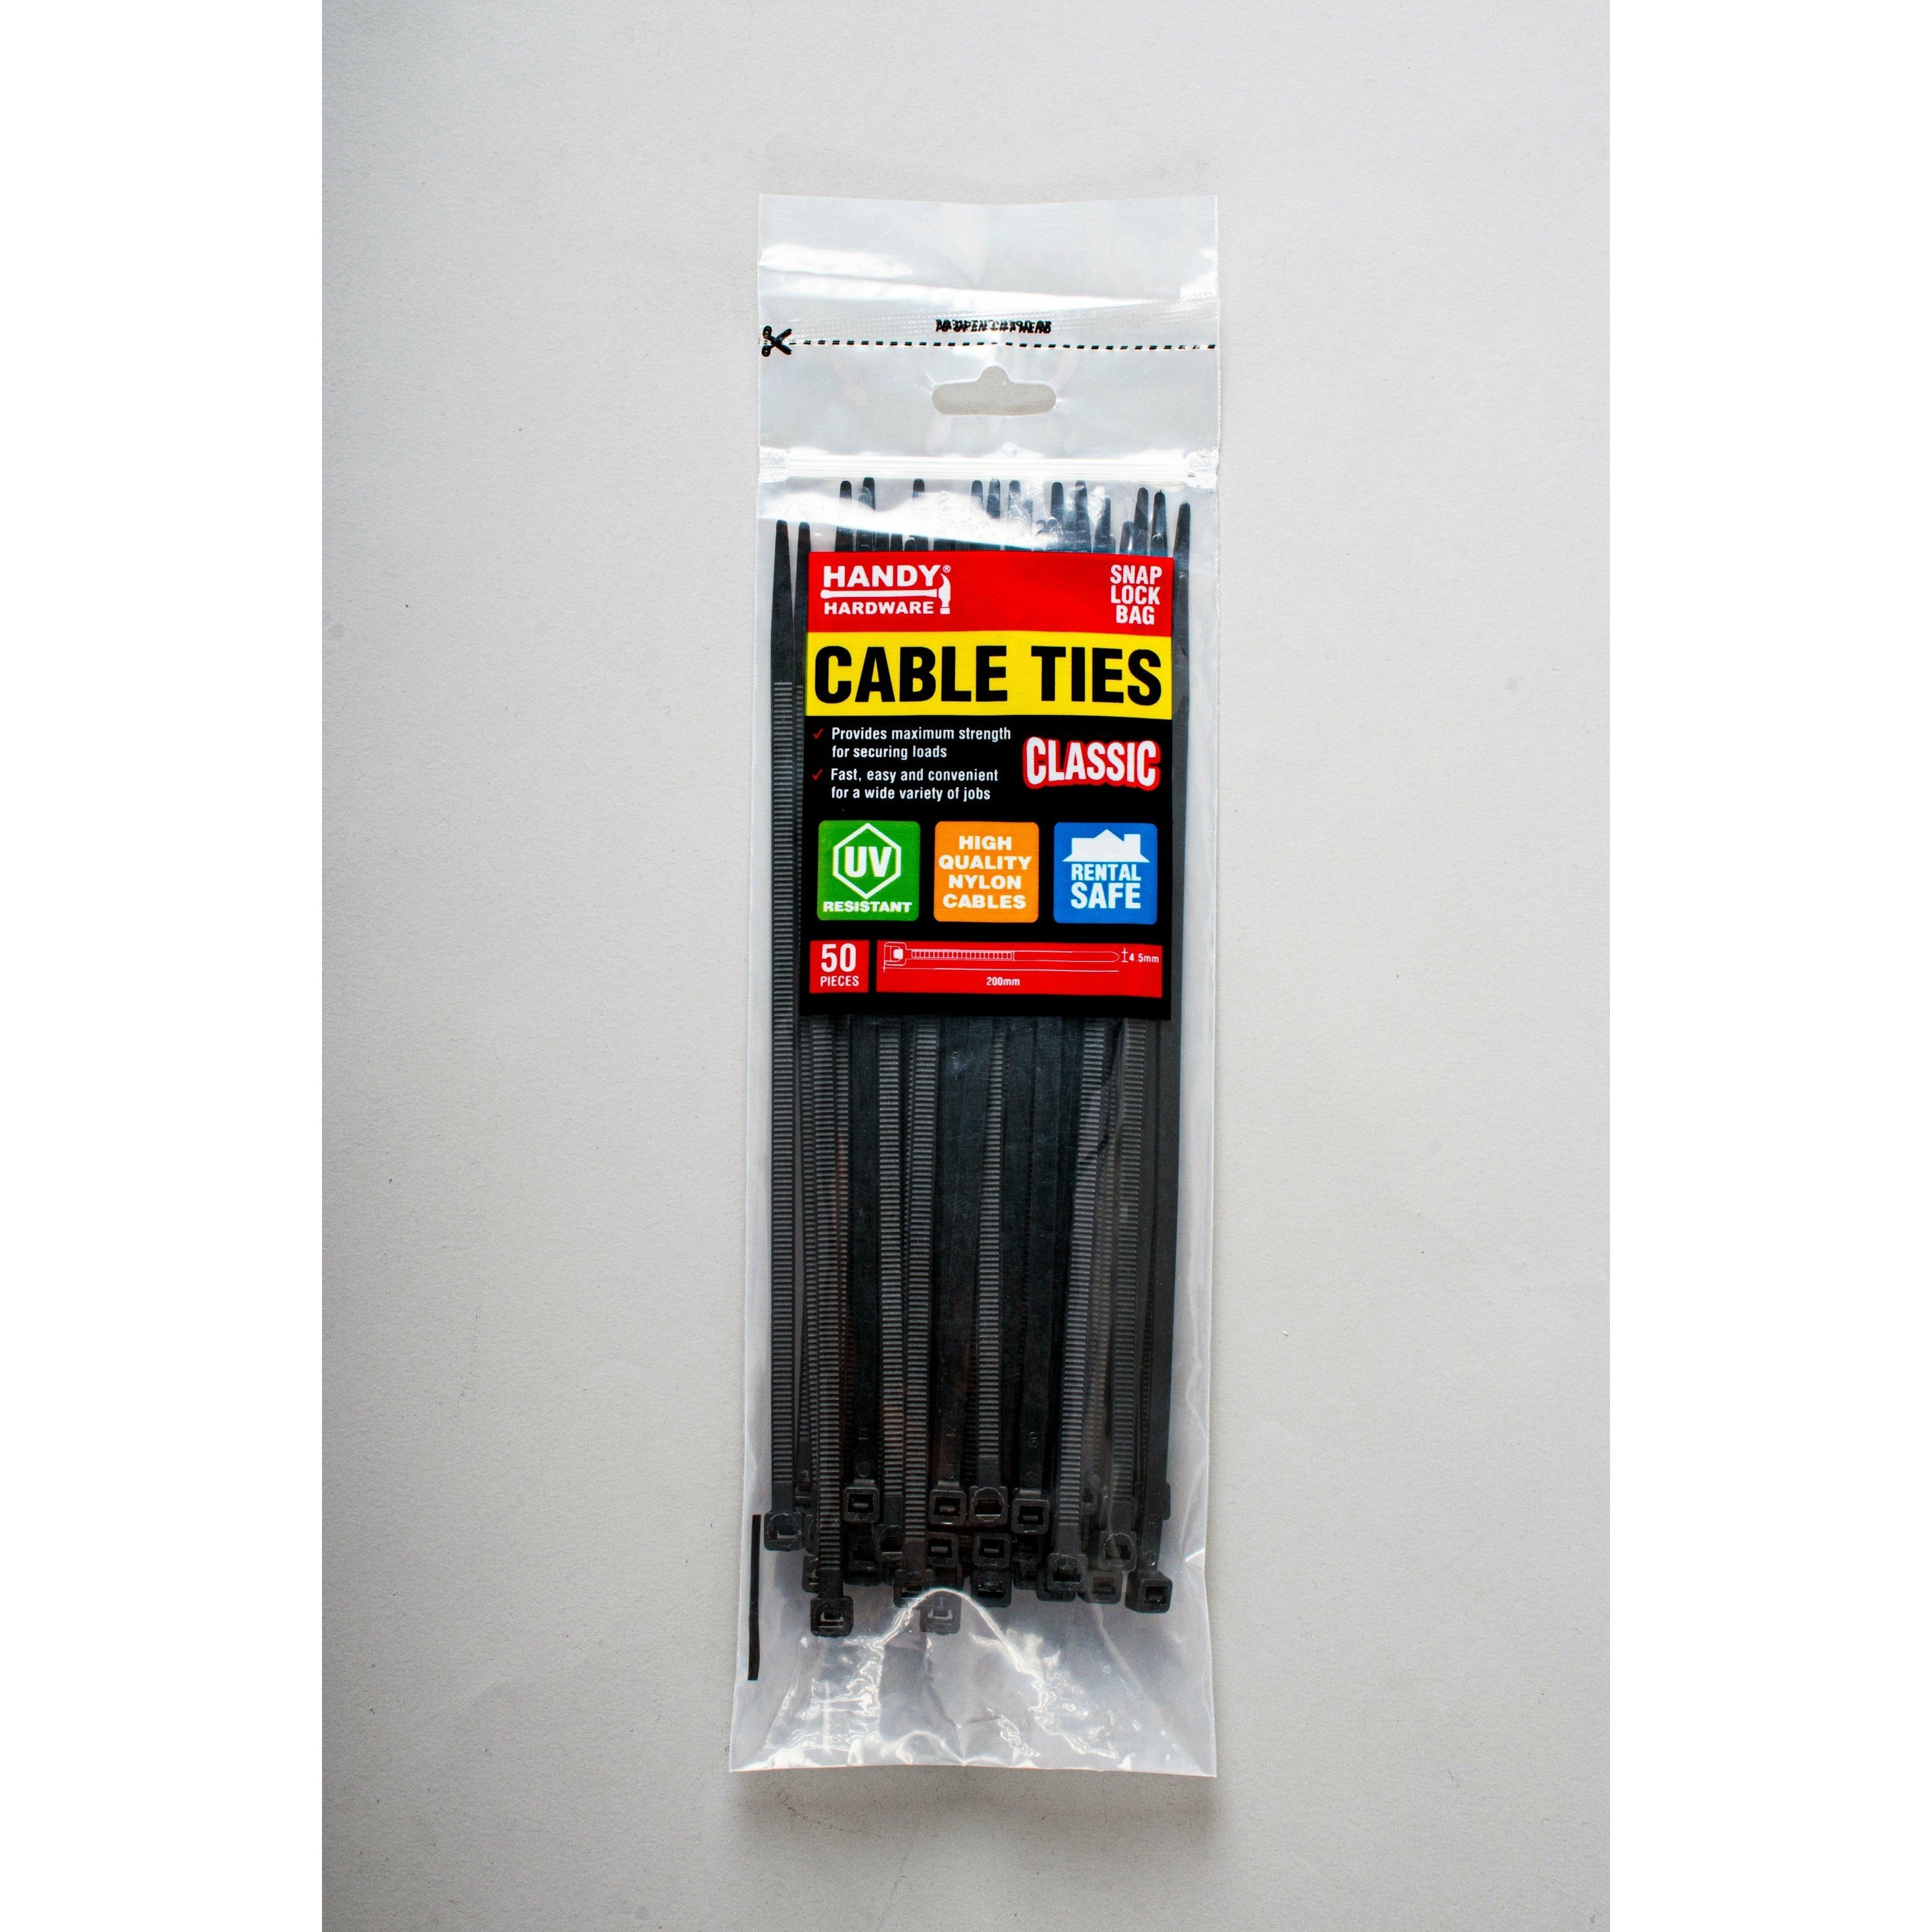 Cable Ties in Snap Lock Bag - 200x4.5mm 50 Piece Assorted Default Title